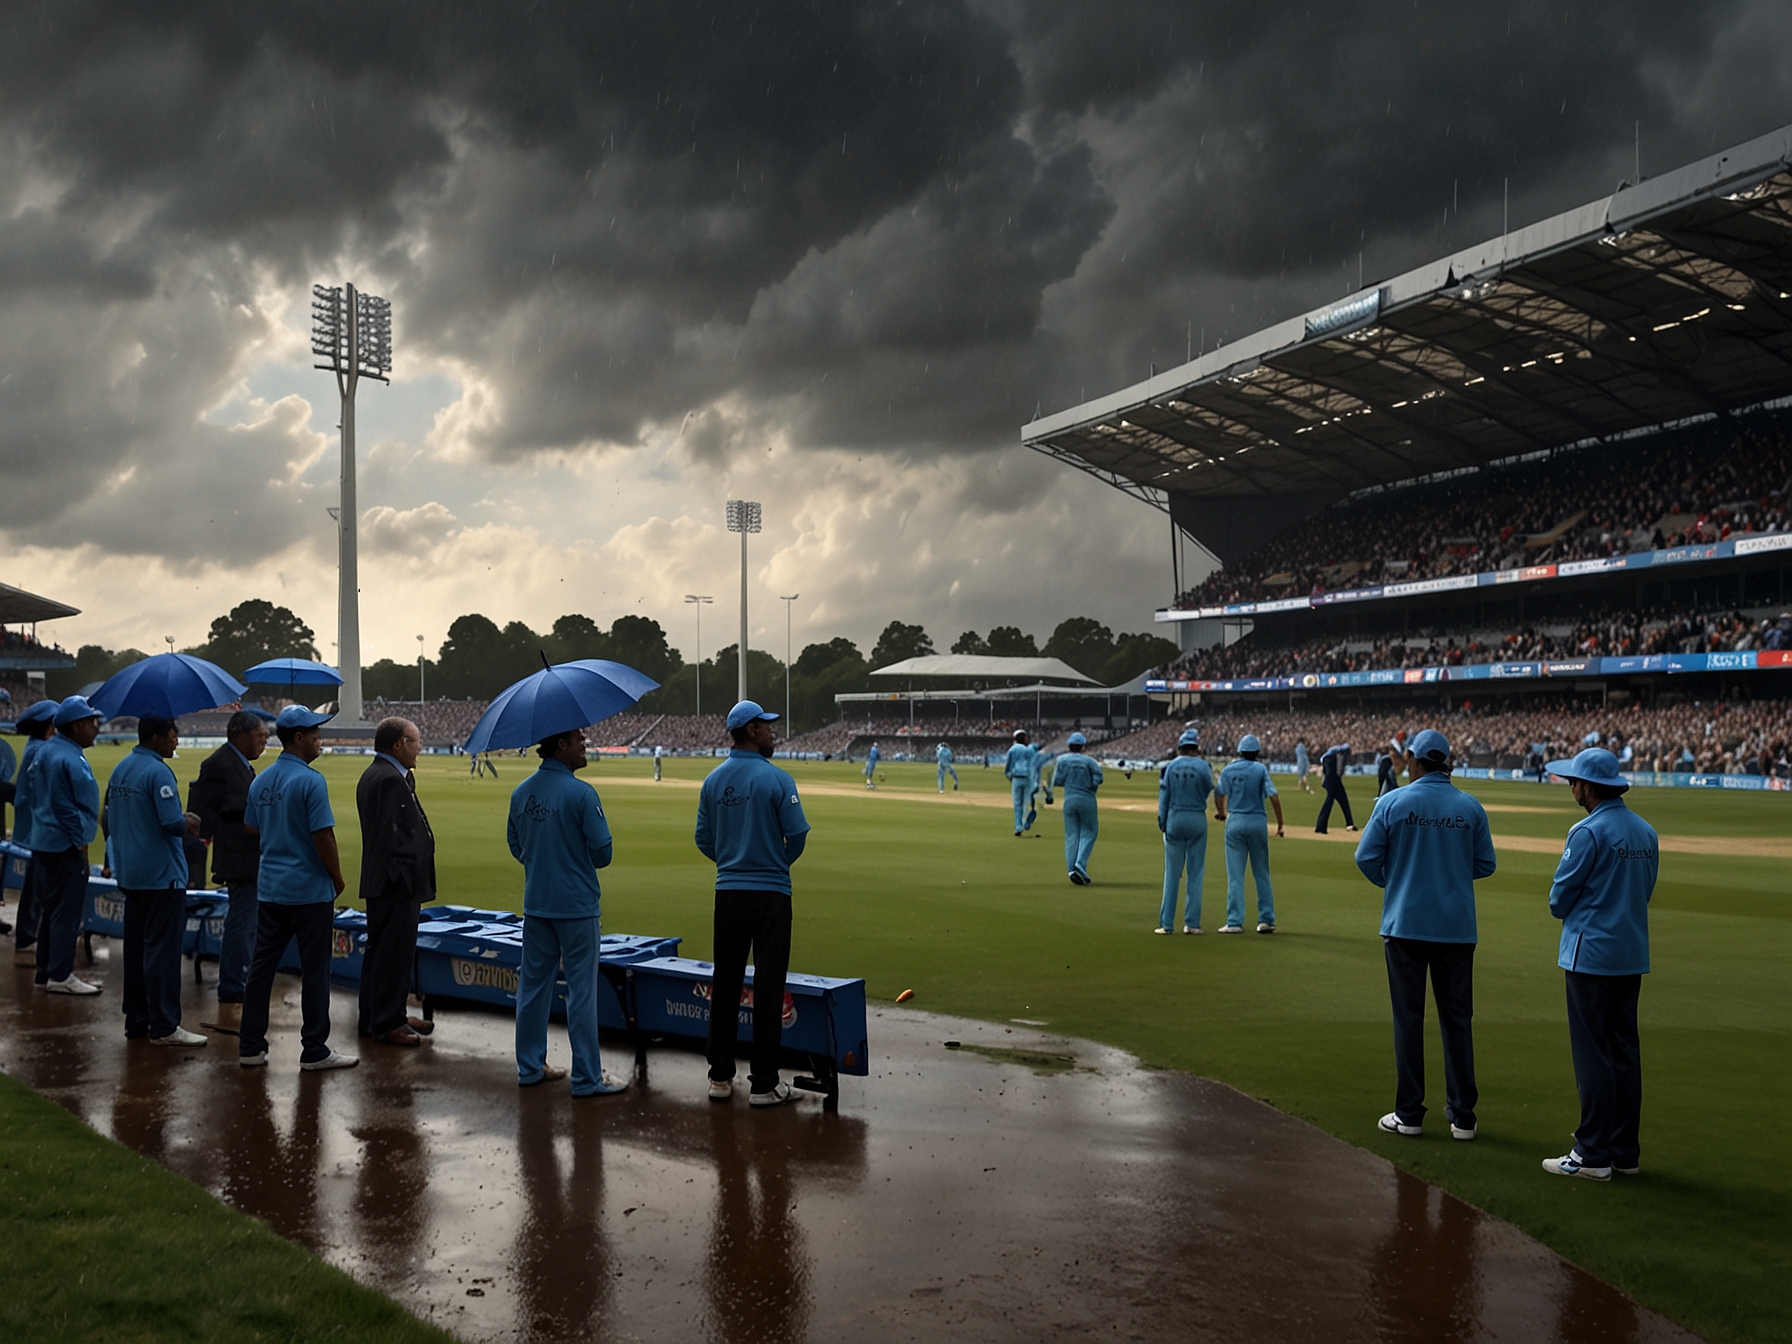 A dramatic scene at Edgbaston as players from India and England wait patiently during one of the lengthy rain delays that shortened the ICC Champions Trophy final to 20 overs per side.